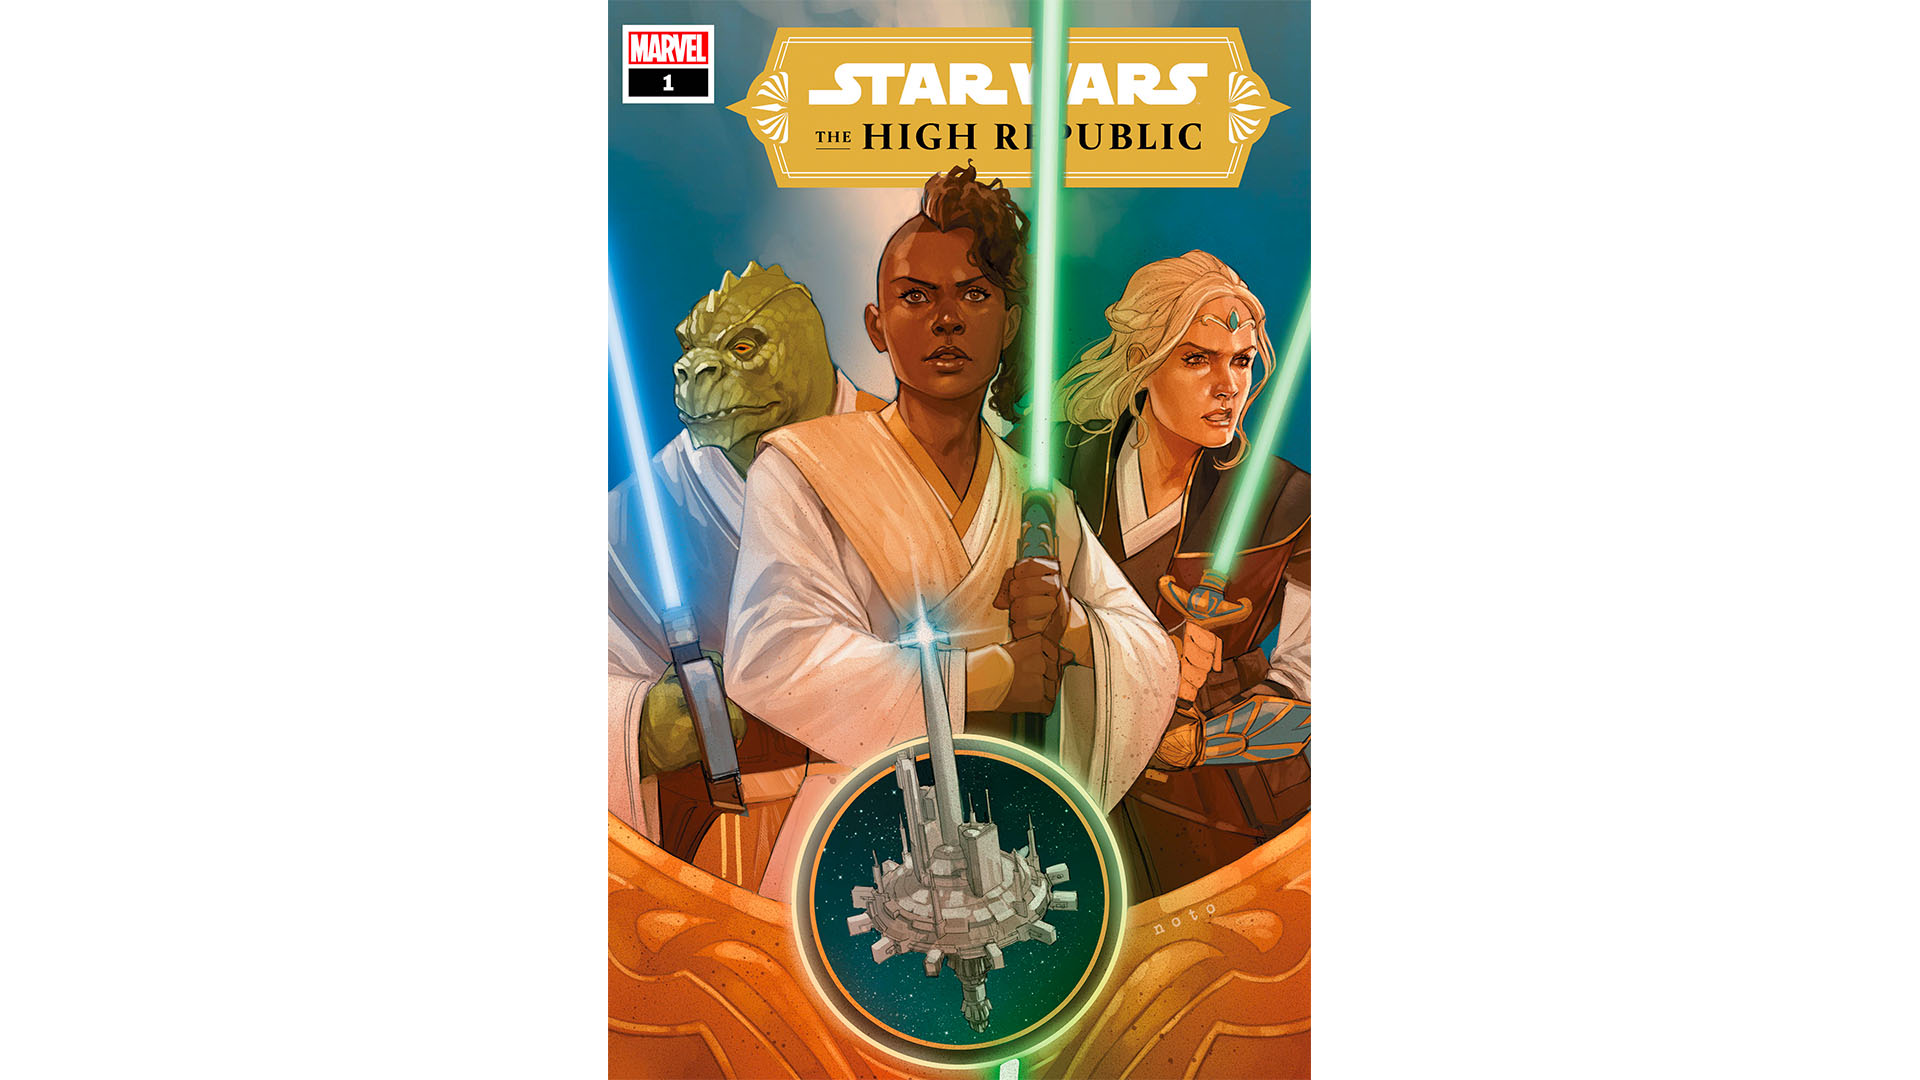 The cover of Marvel's Star Wars: The High Republic comic book written by Cavan Scott and illustrated by Ario Anindito